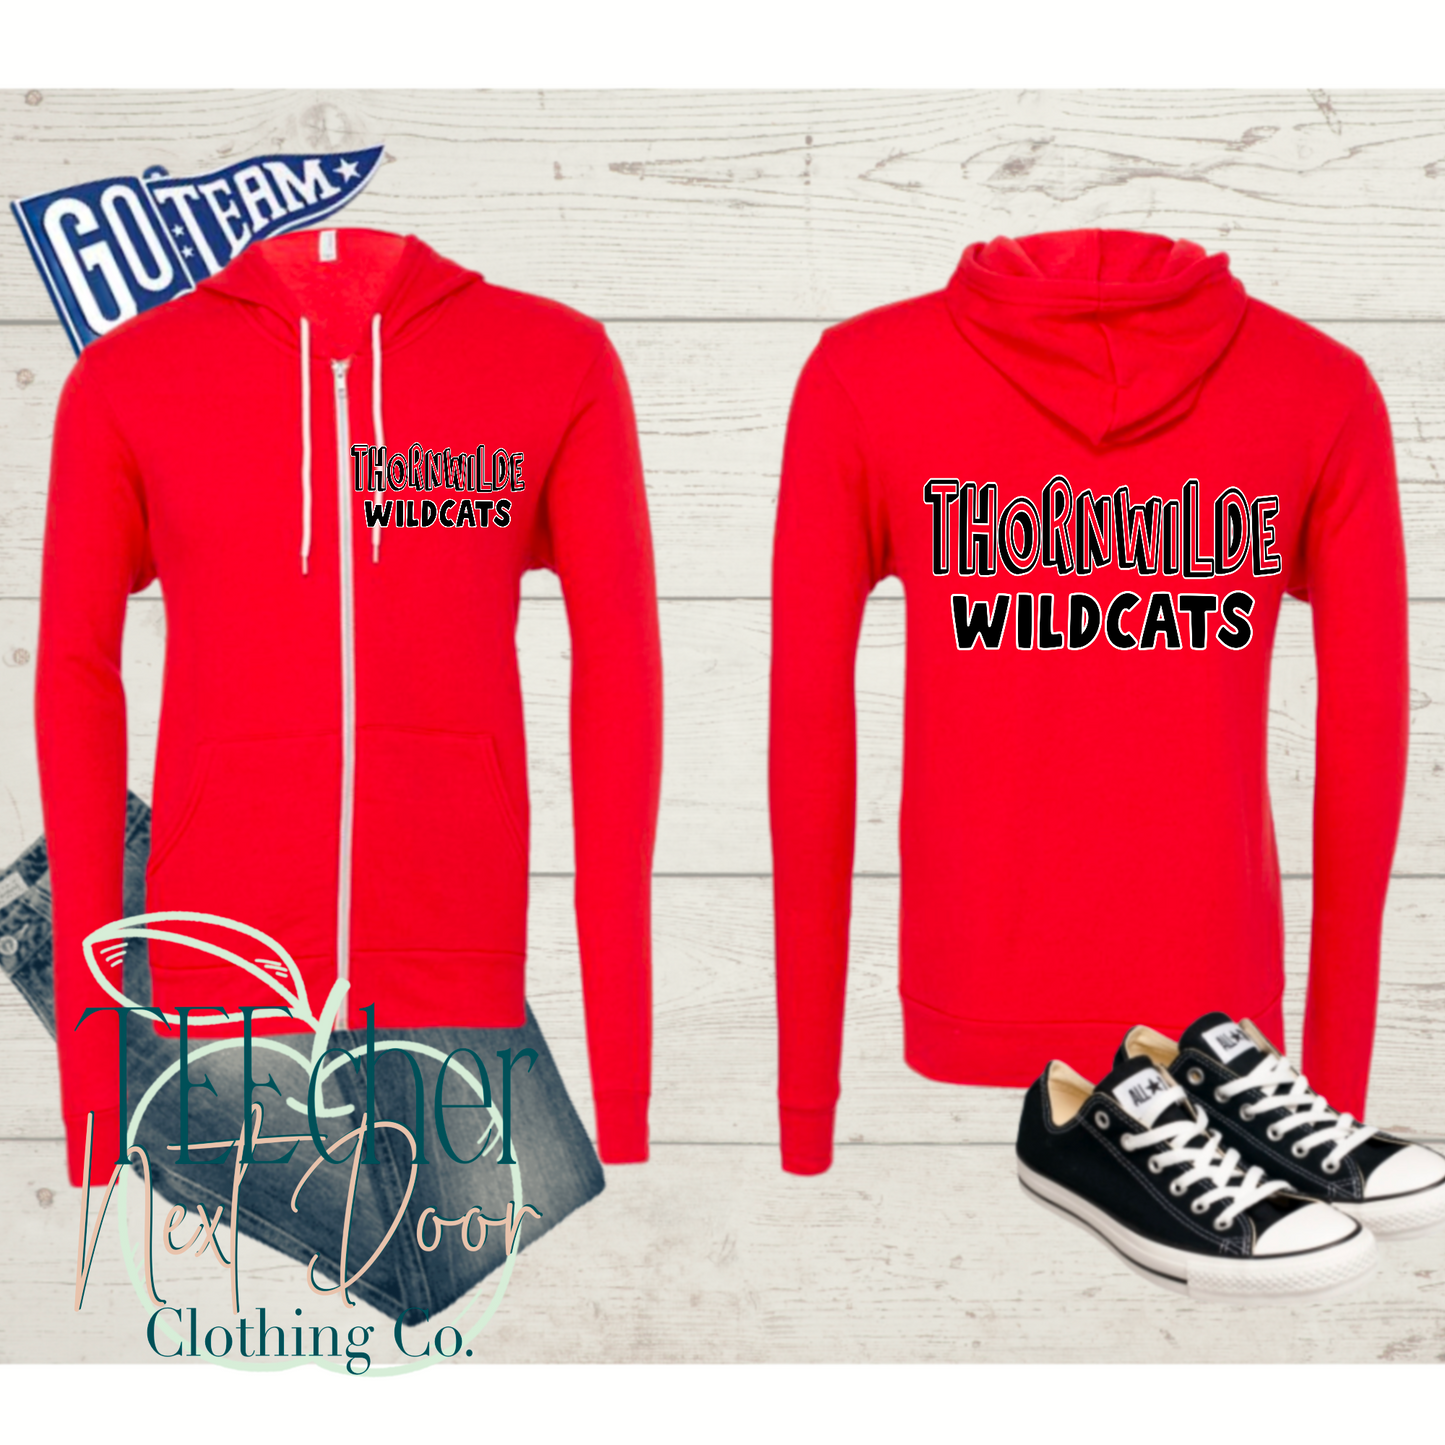 Thornwilde Wildcats Fun and Simple